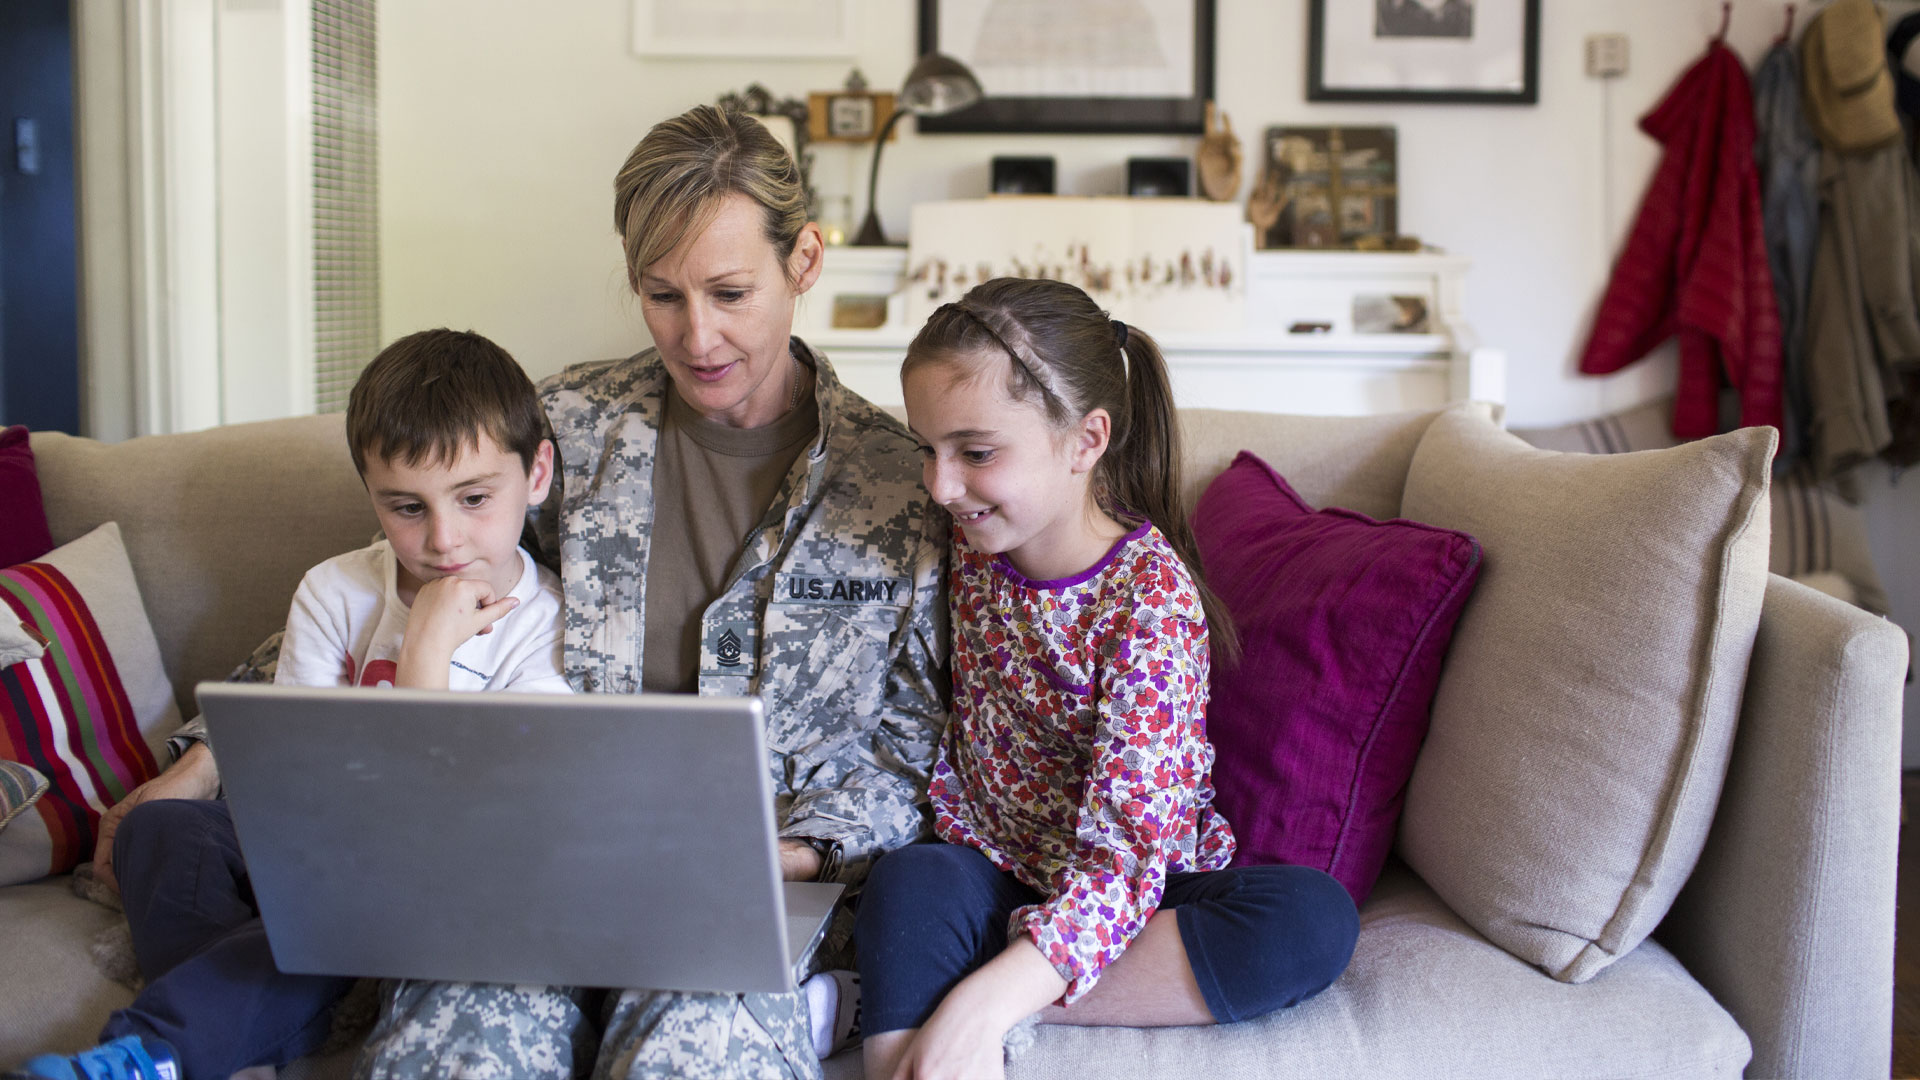 A military service person and two children sit together on a couch while using a laptop together